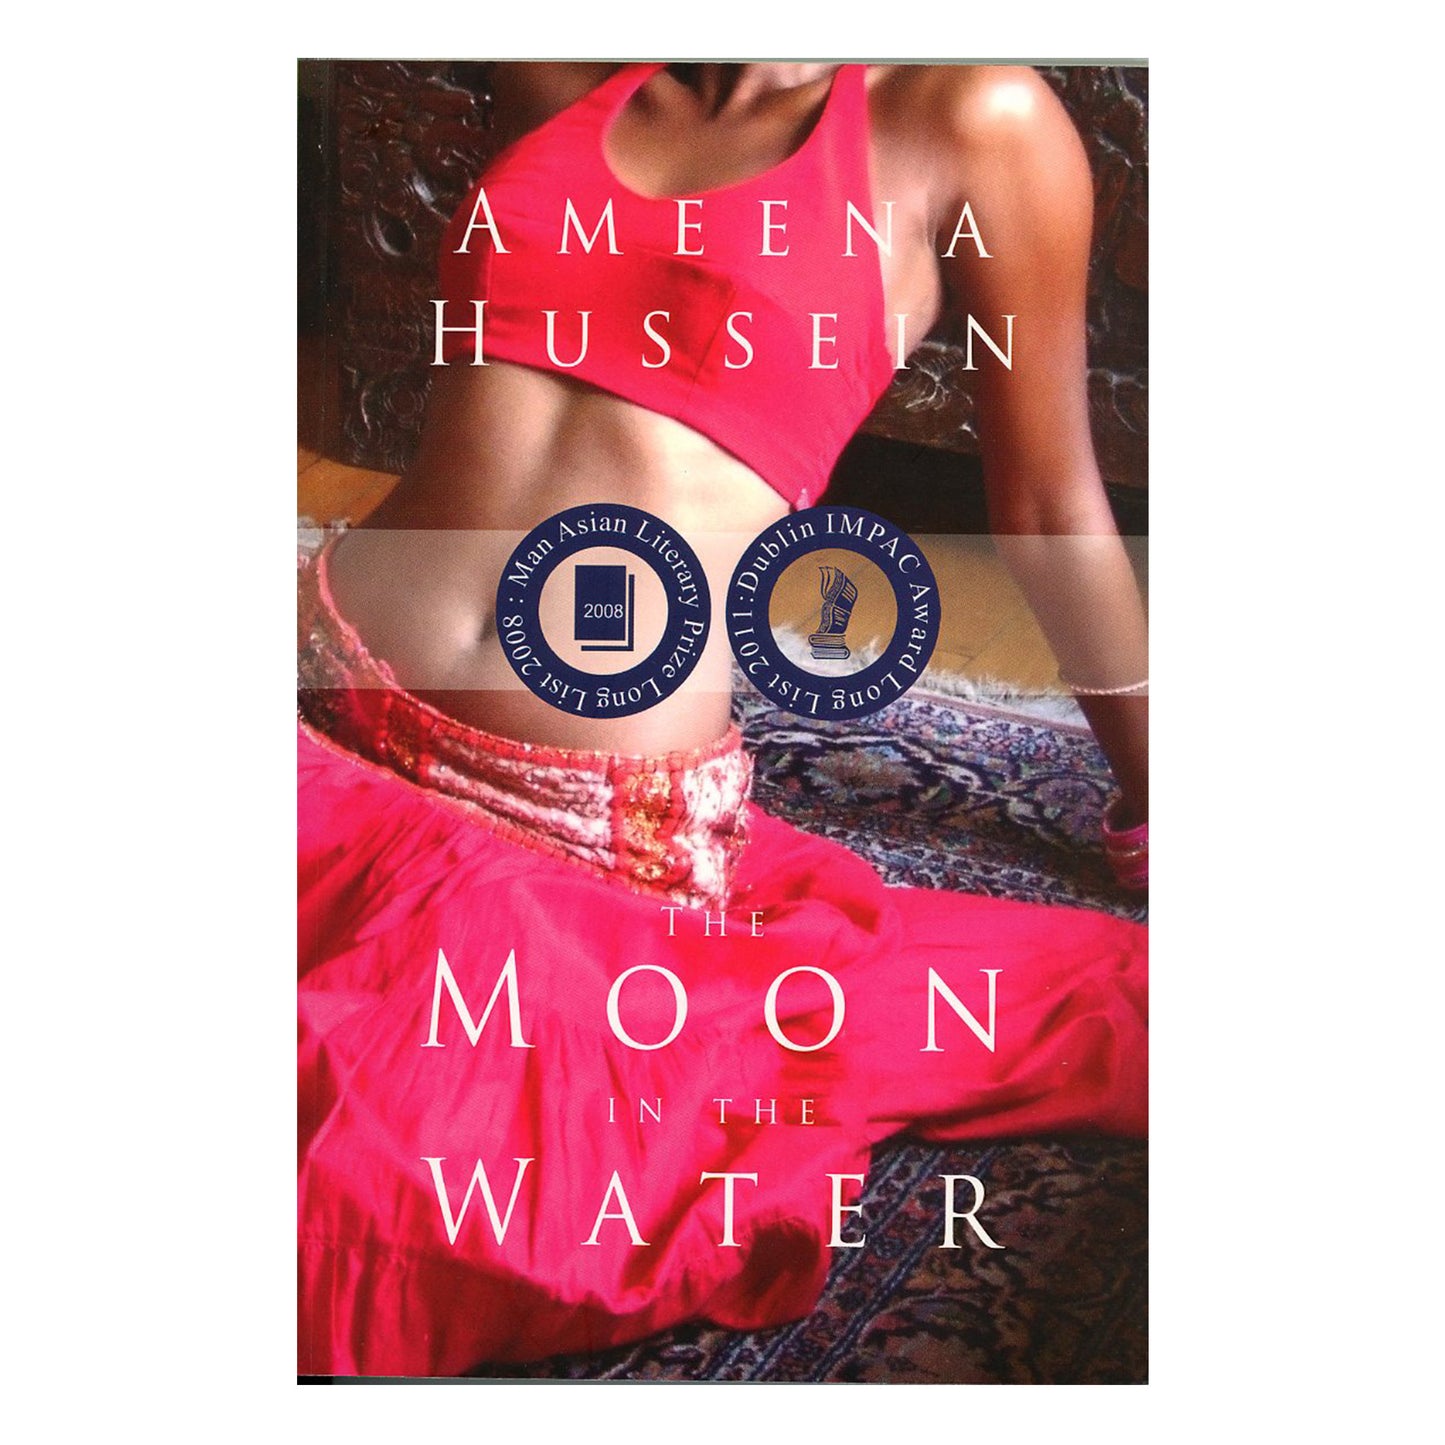 The Moon In The Water by Ameena Hussein